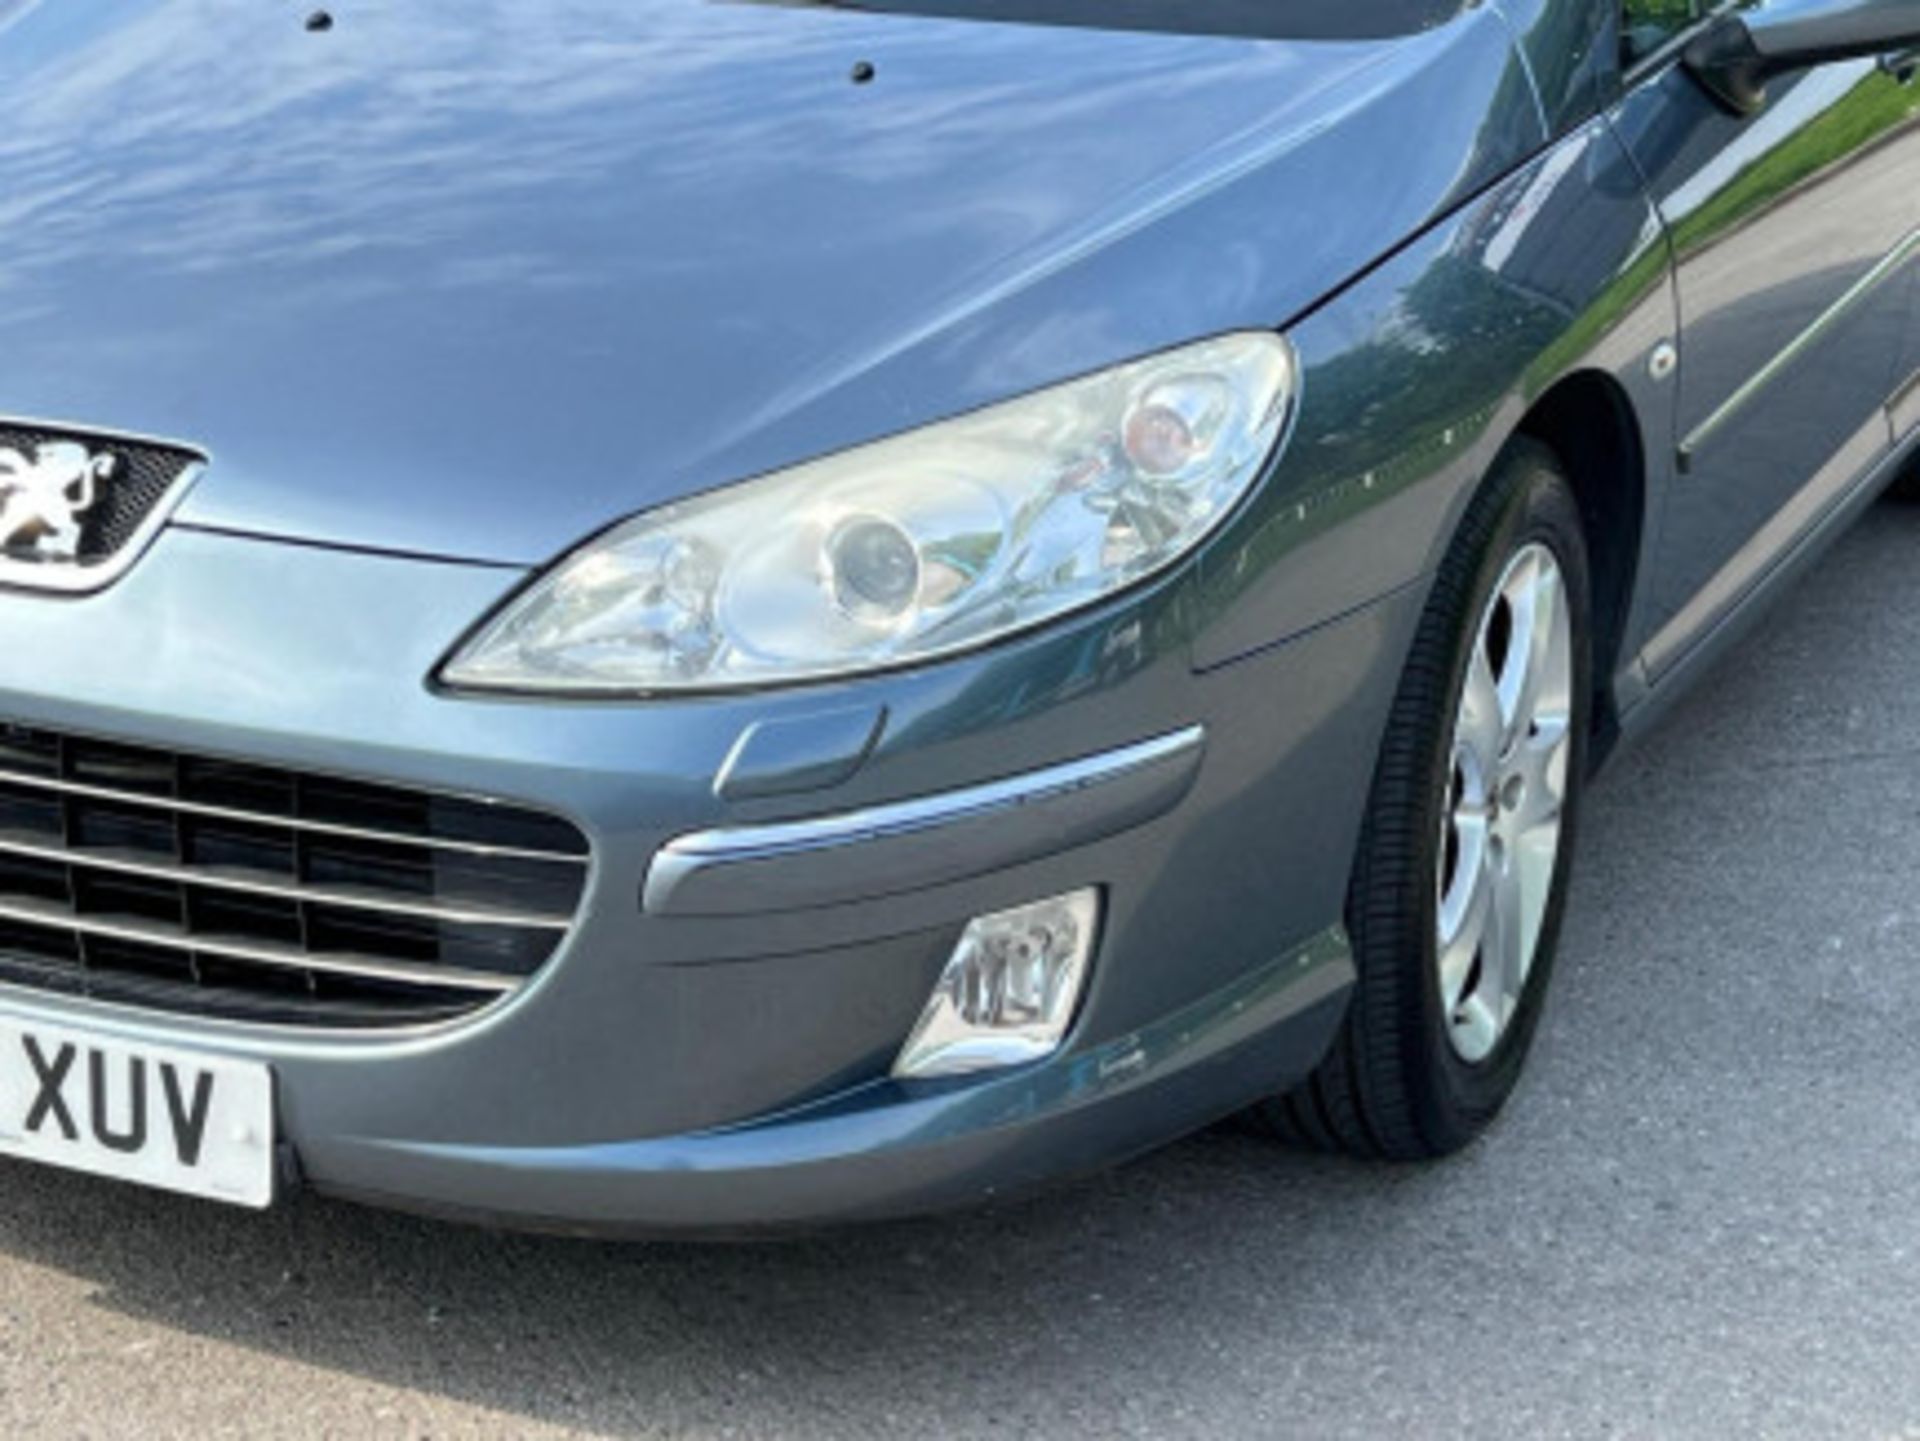 STYLISH AND RELIABLE 2007 PEUGEOT 407 2.0 HDI GT >>--NO VAT ON HAMMER--<< - Image 41 of 84